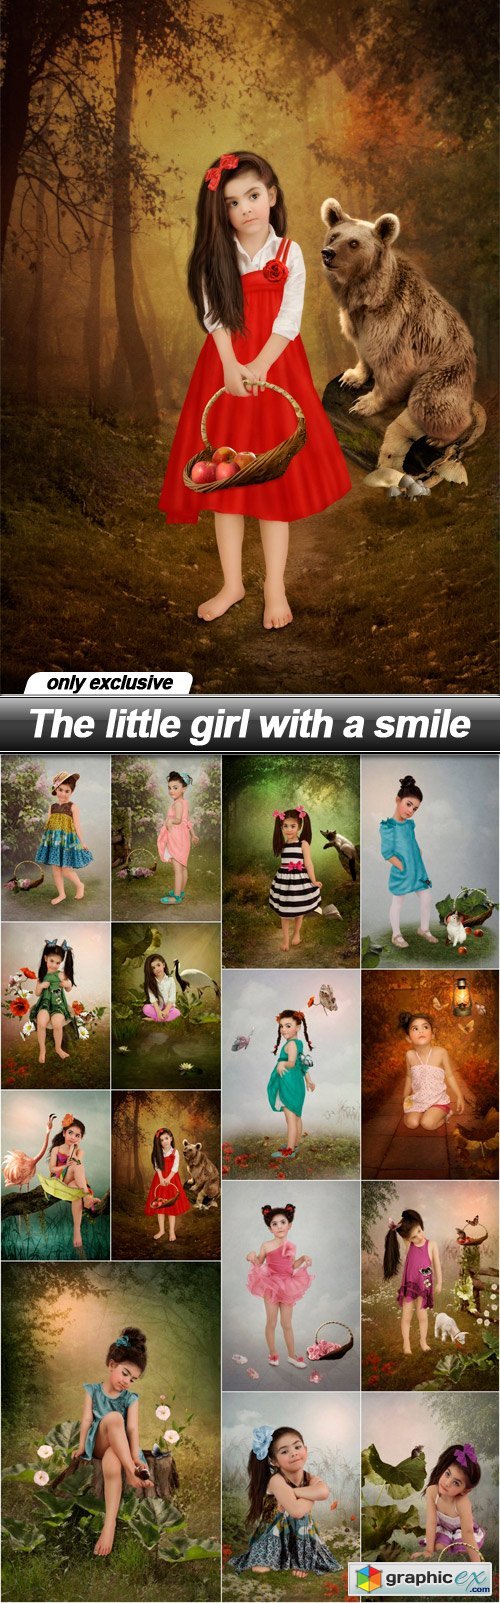 The little girl with a smile - 15 UHQ JPEG